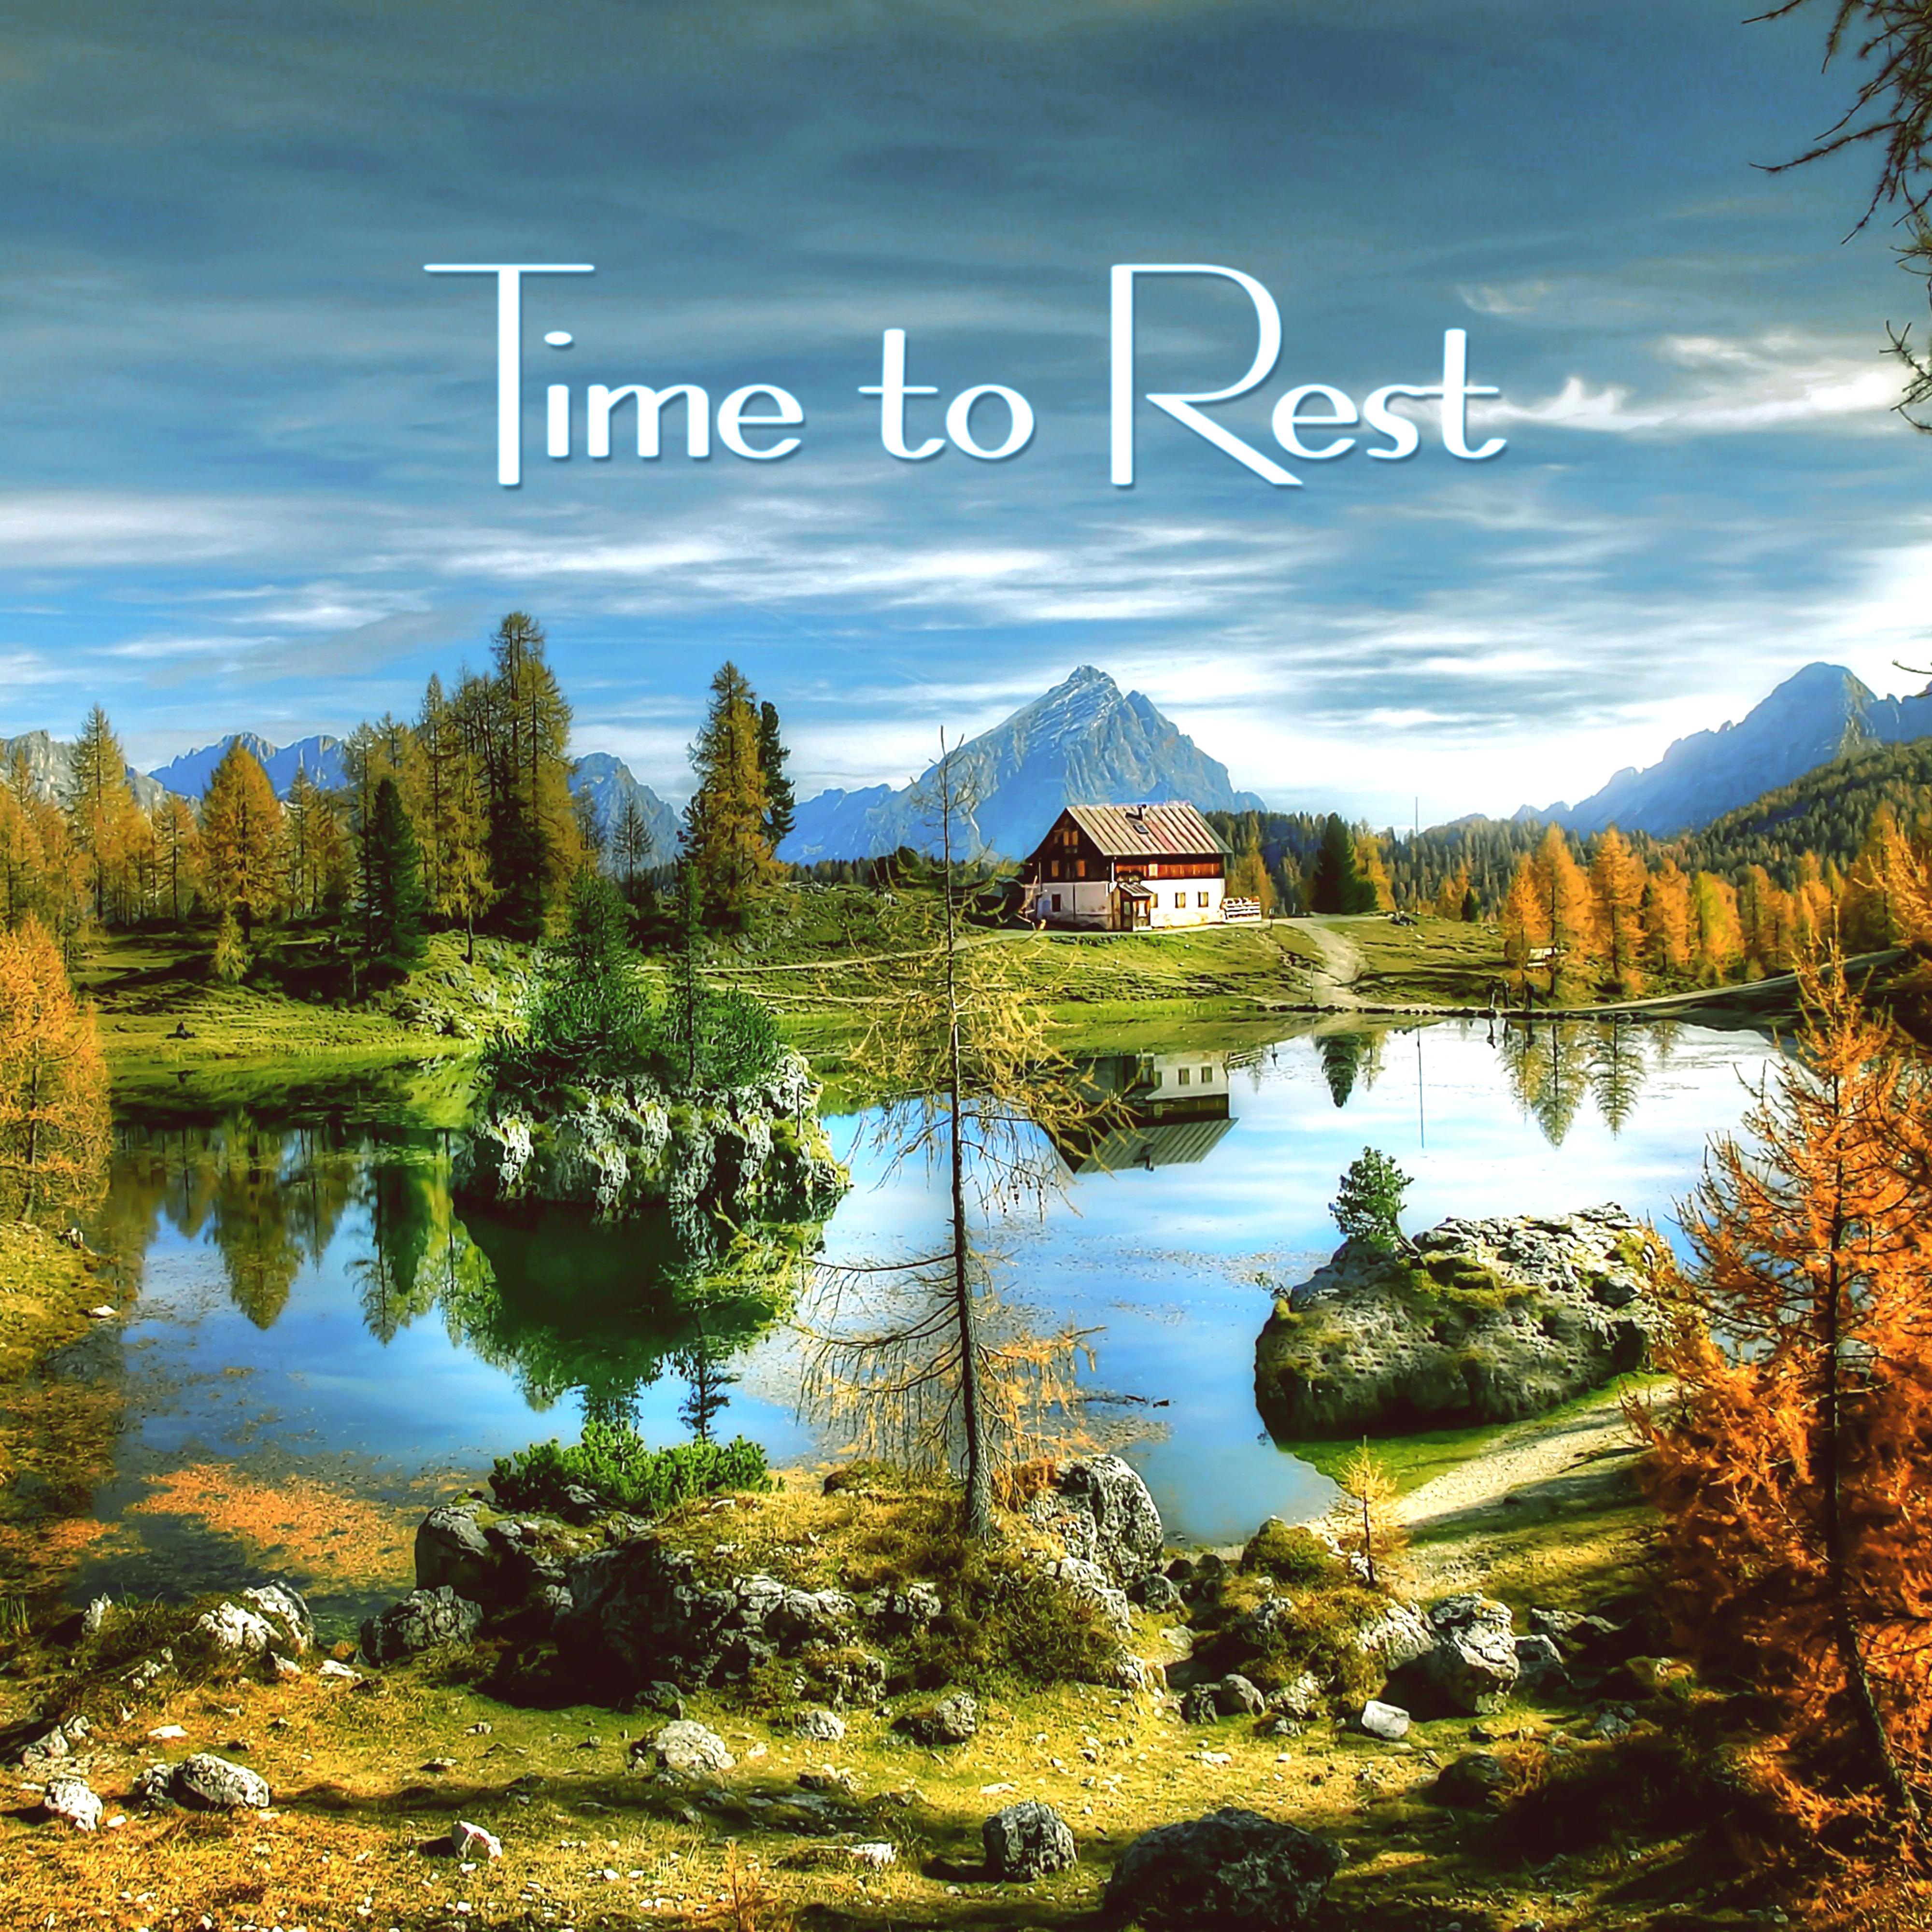 Time to Rest: 15 Relaxing Tracks for Rest, Relaxation and Respite